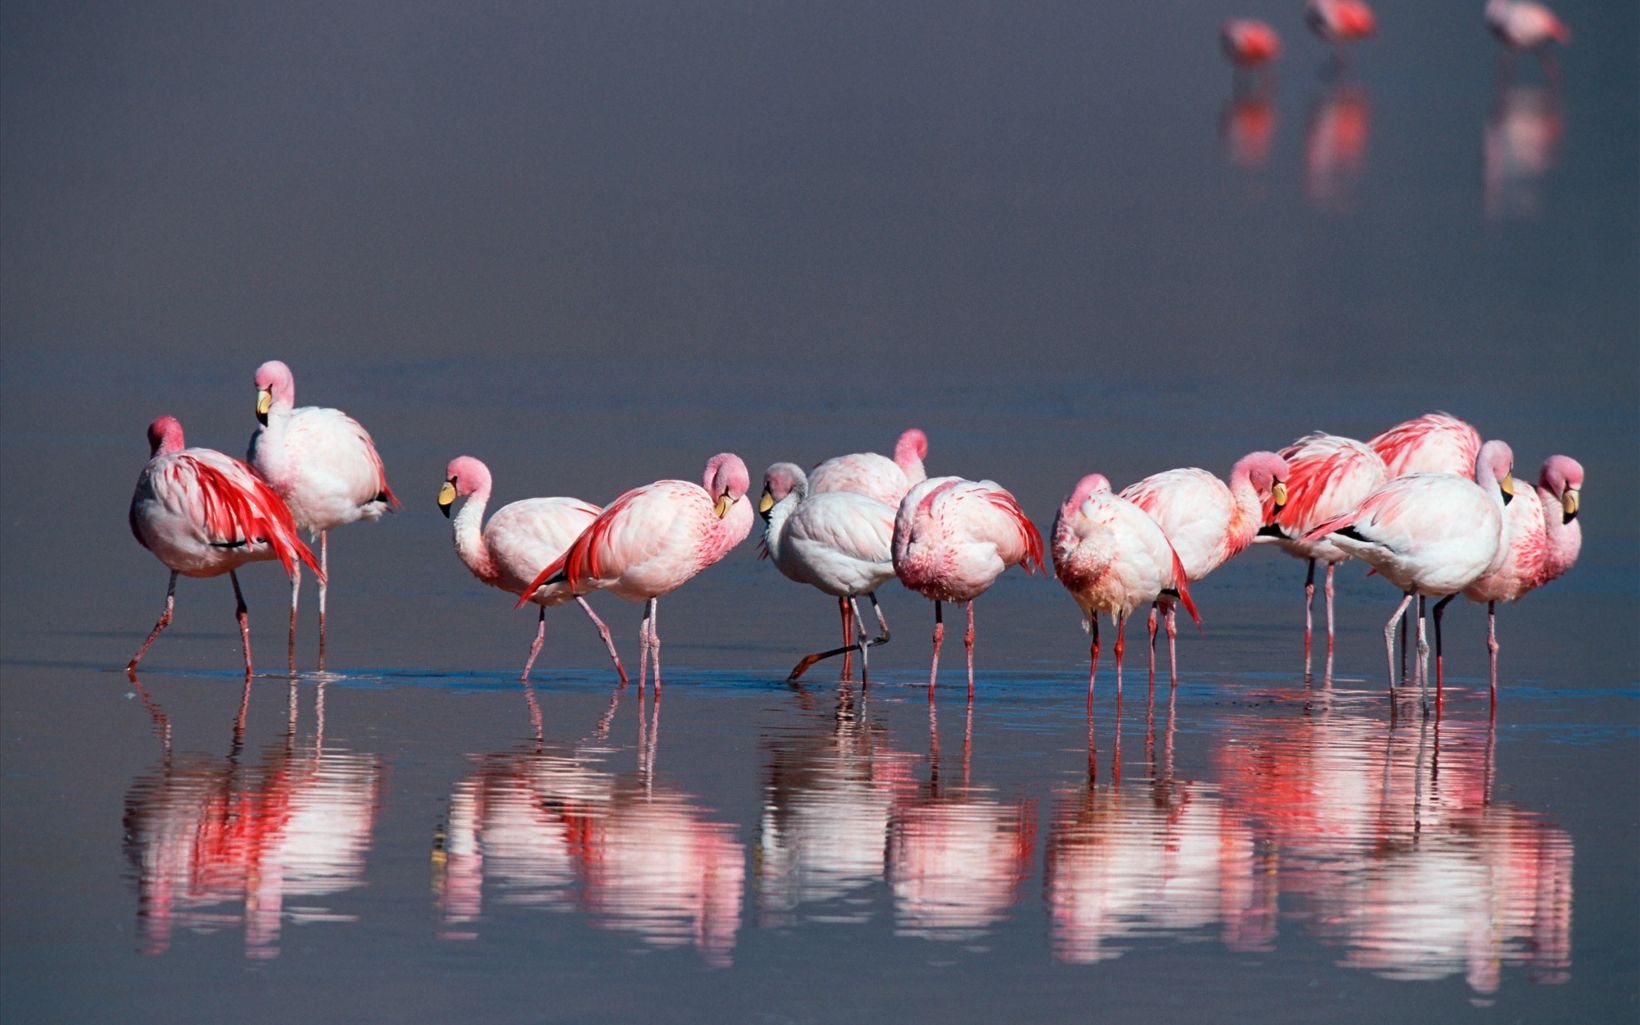 A group of flamingos stand ankle-deep in shallow water.